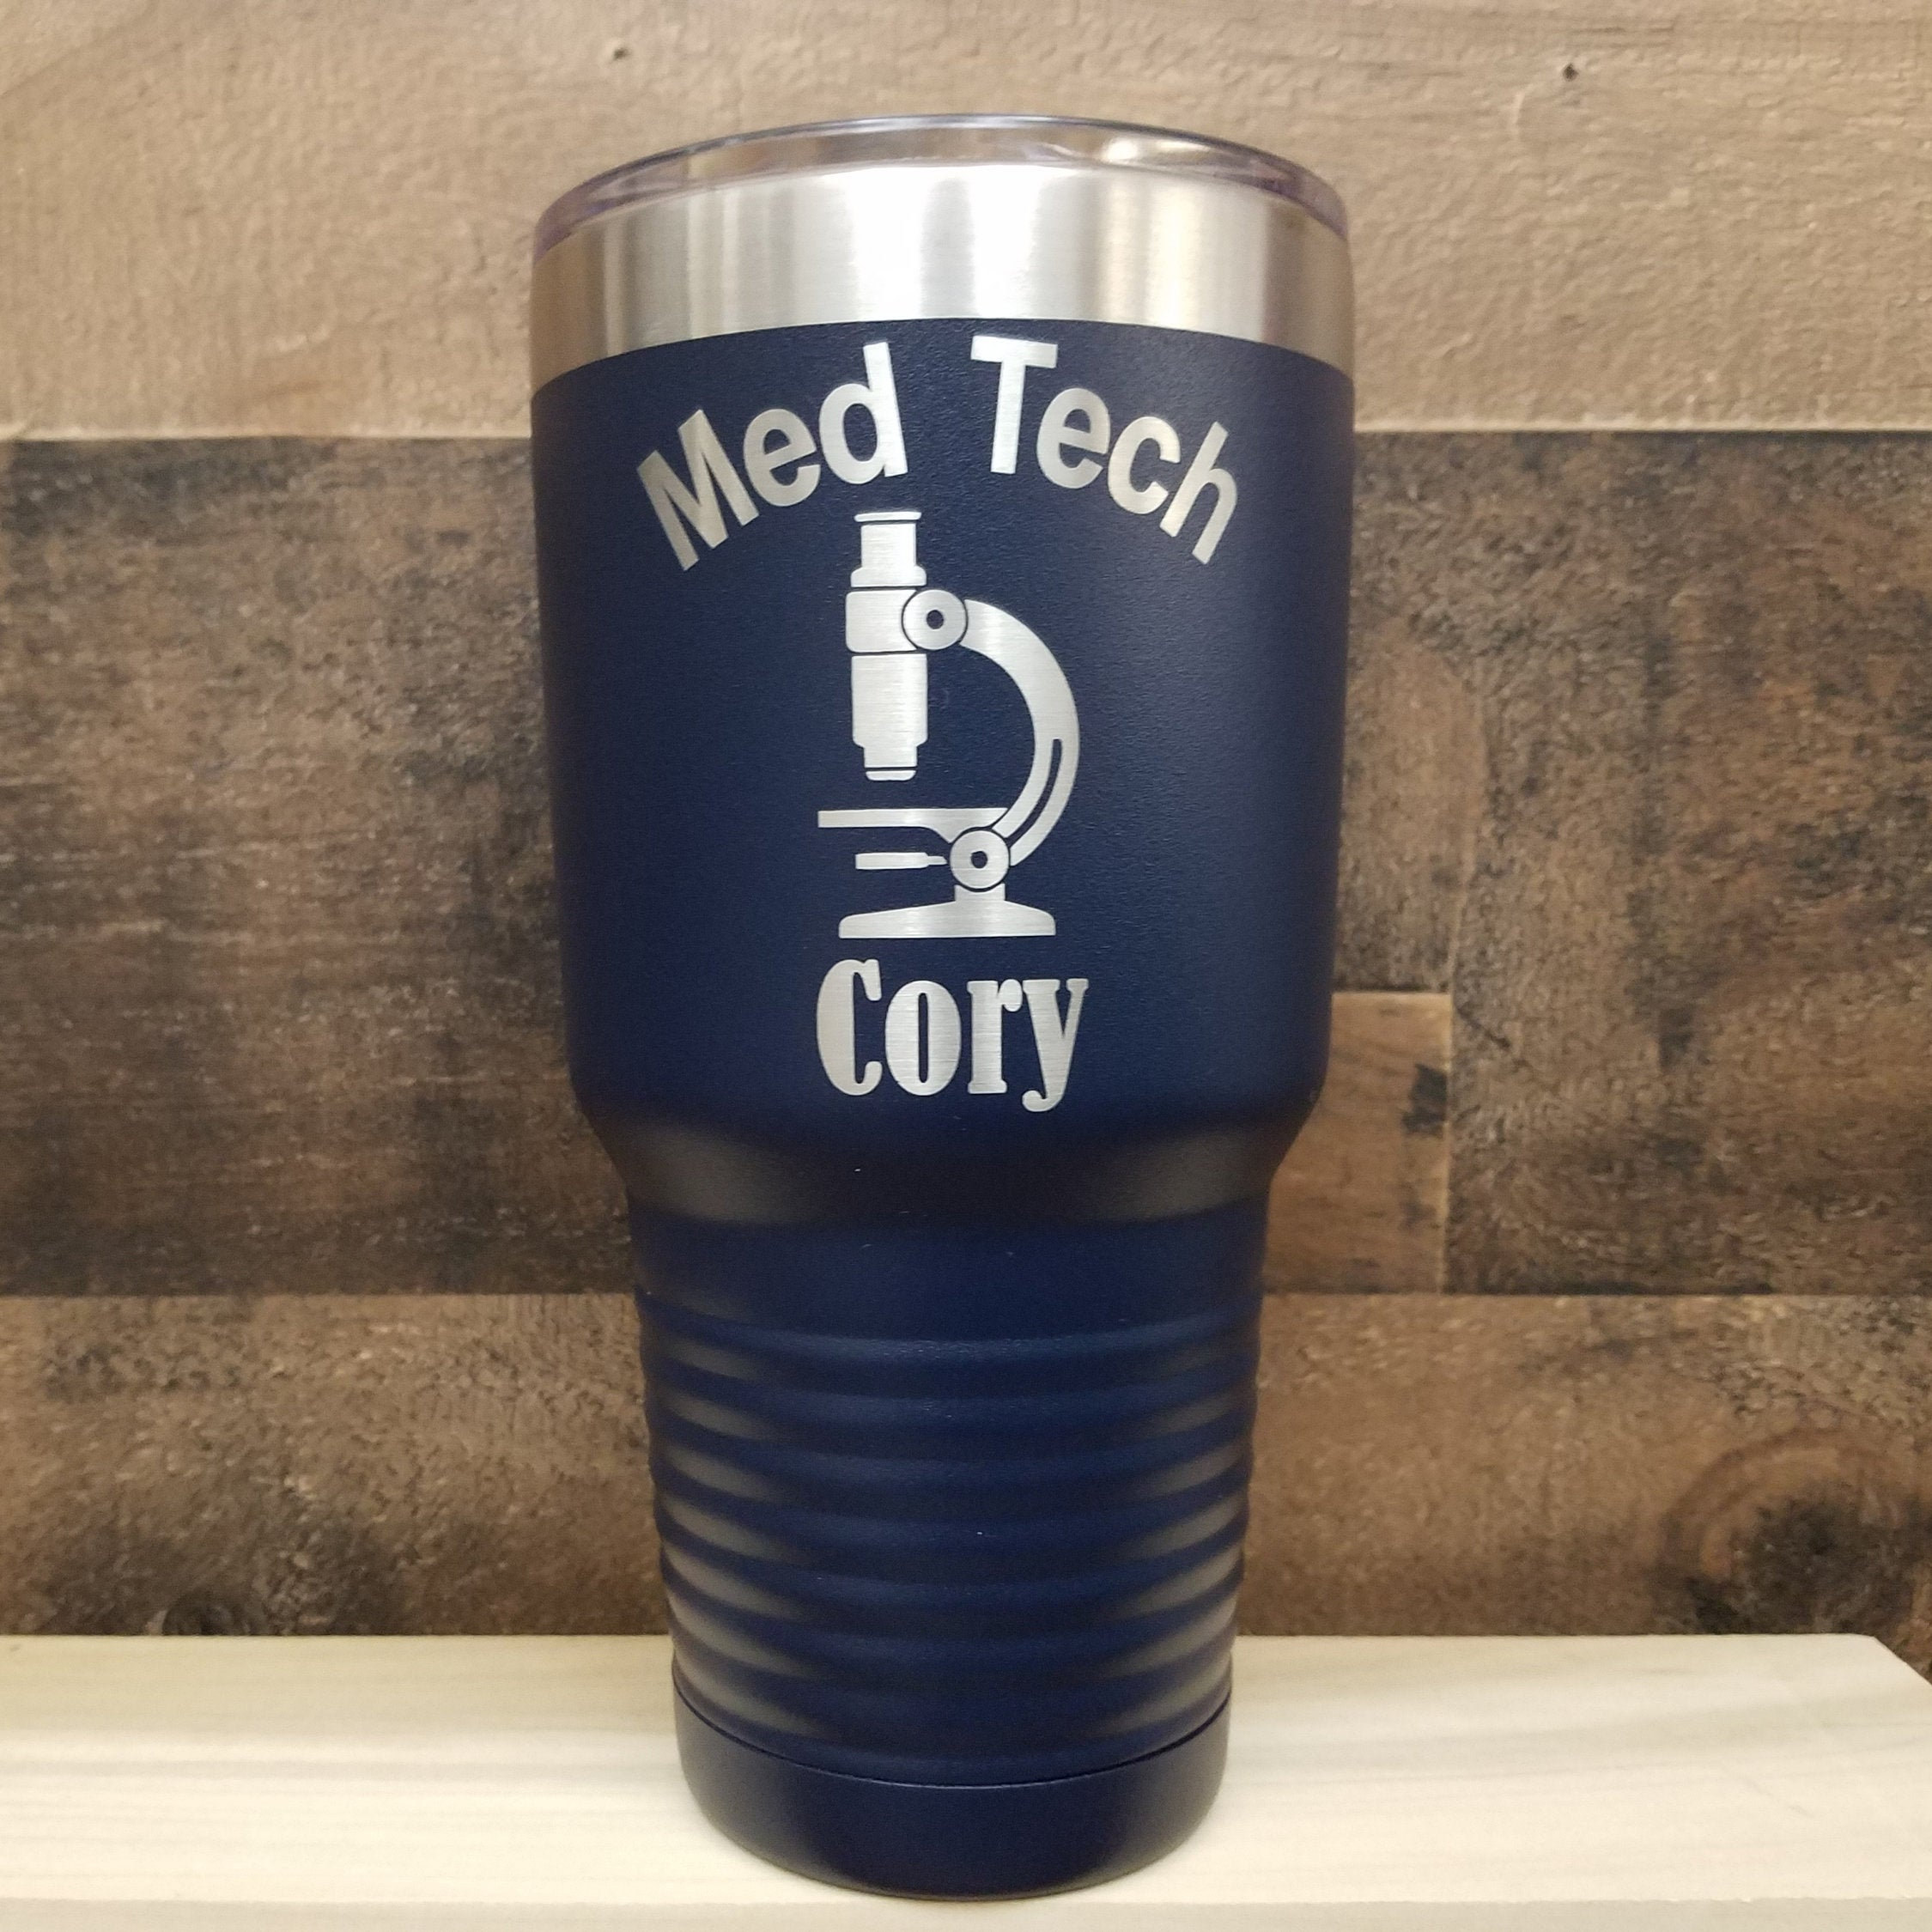 https://3cetching.com/wp-content/uploads/2020/09/med-tech-engraved-personalized-tumbler-with-name-yeti-style-cup-lab-tech-gift-5f5fb542.jpg